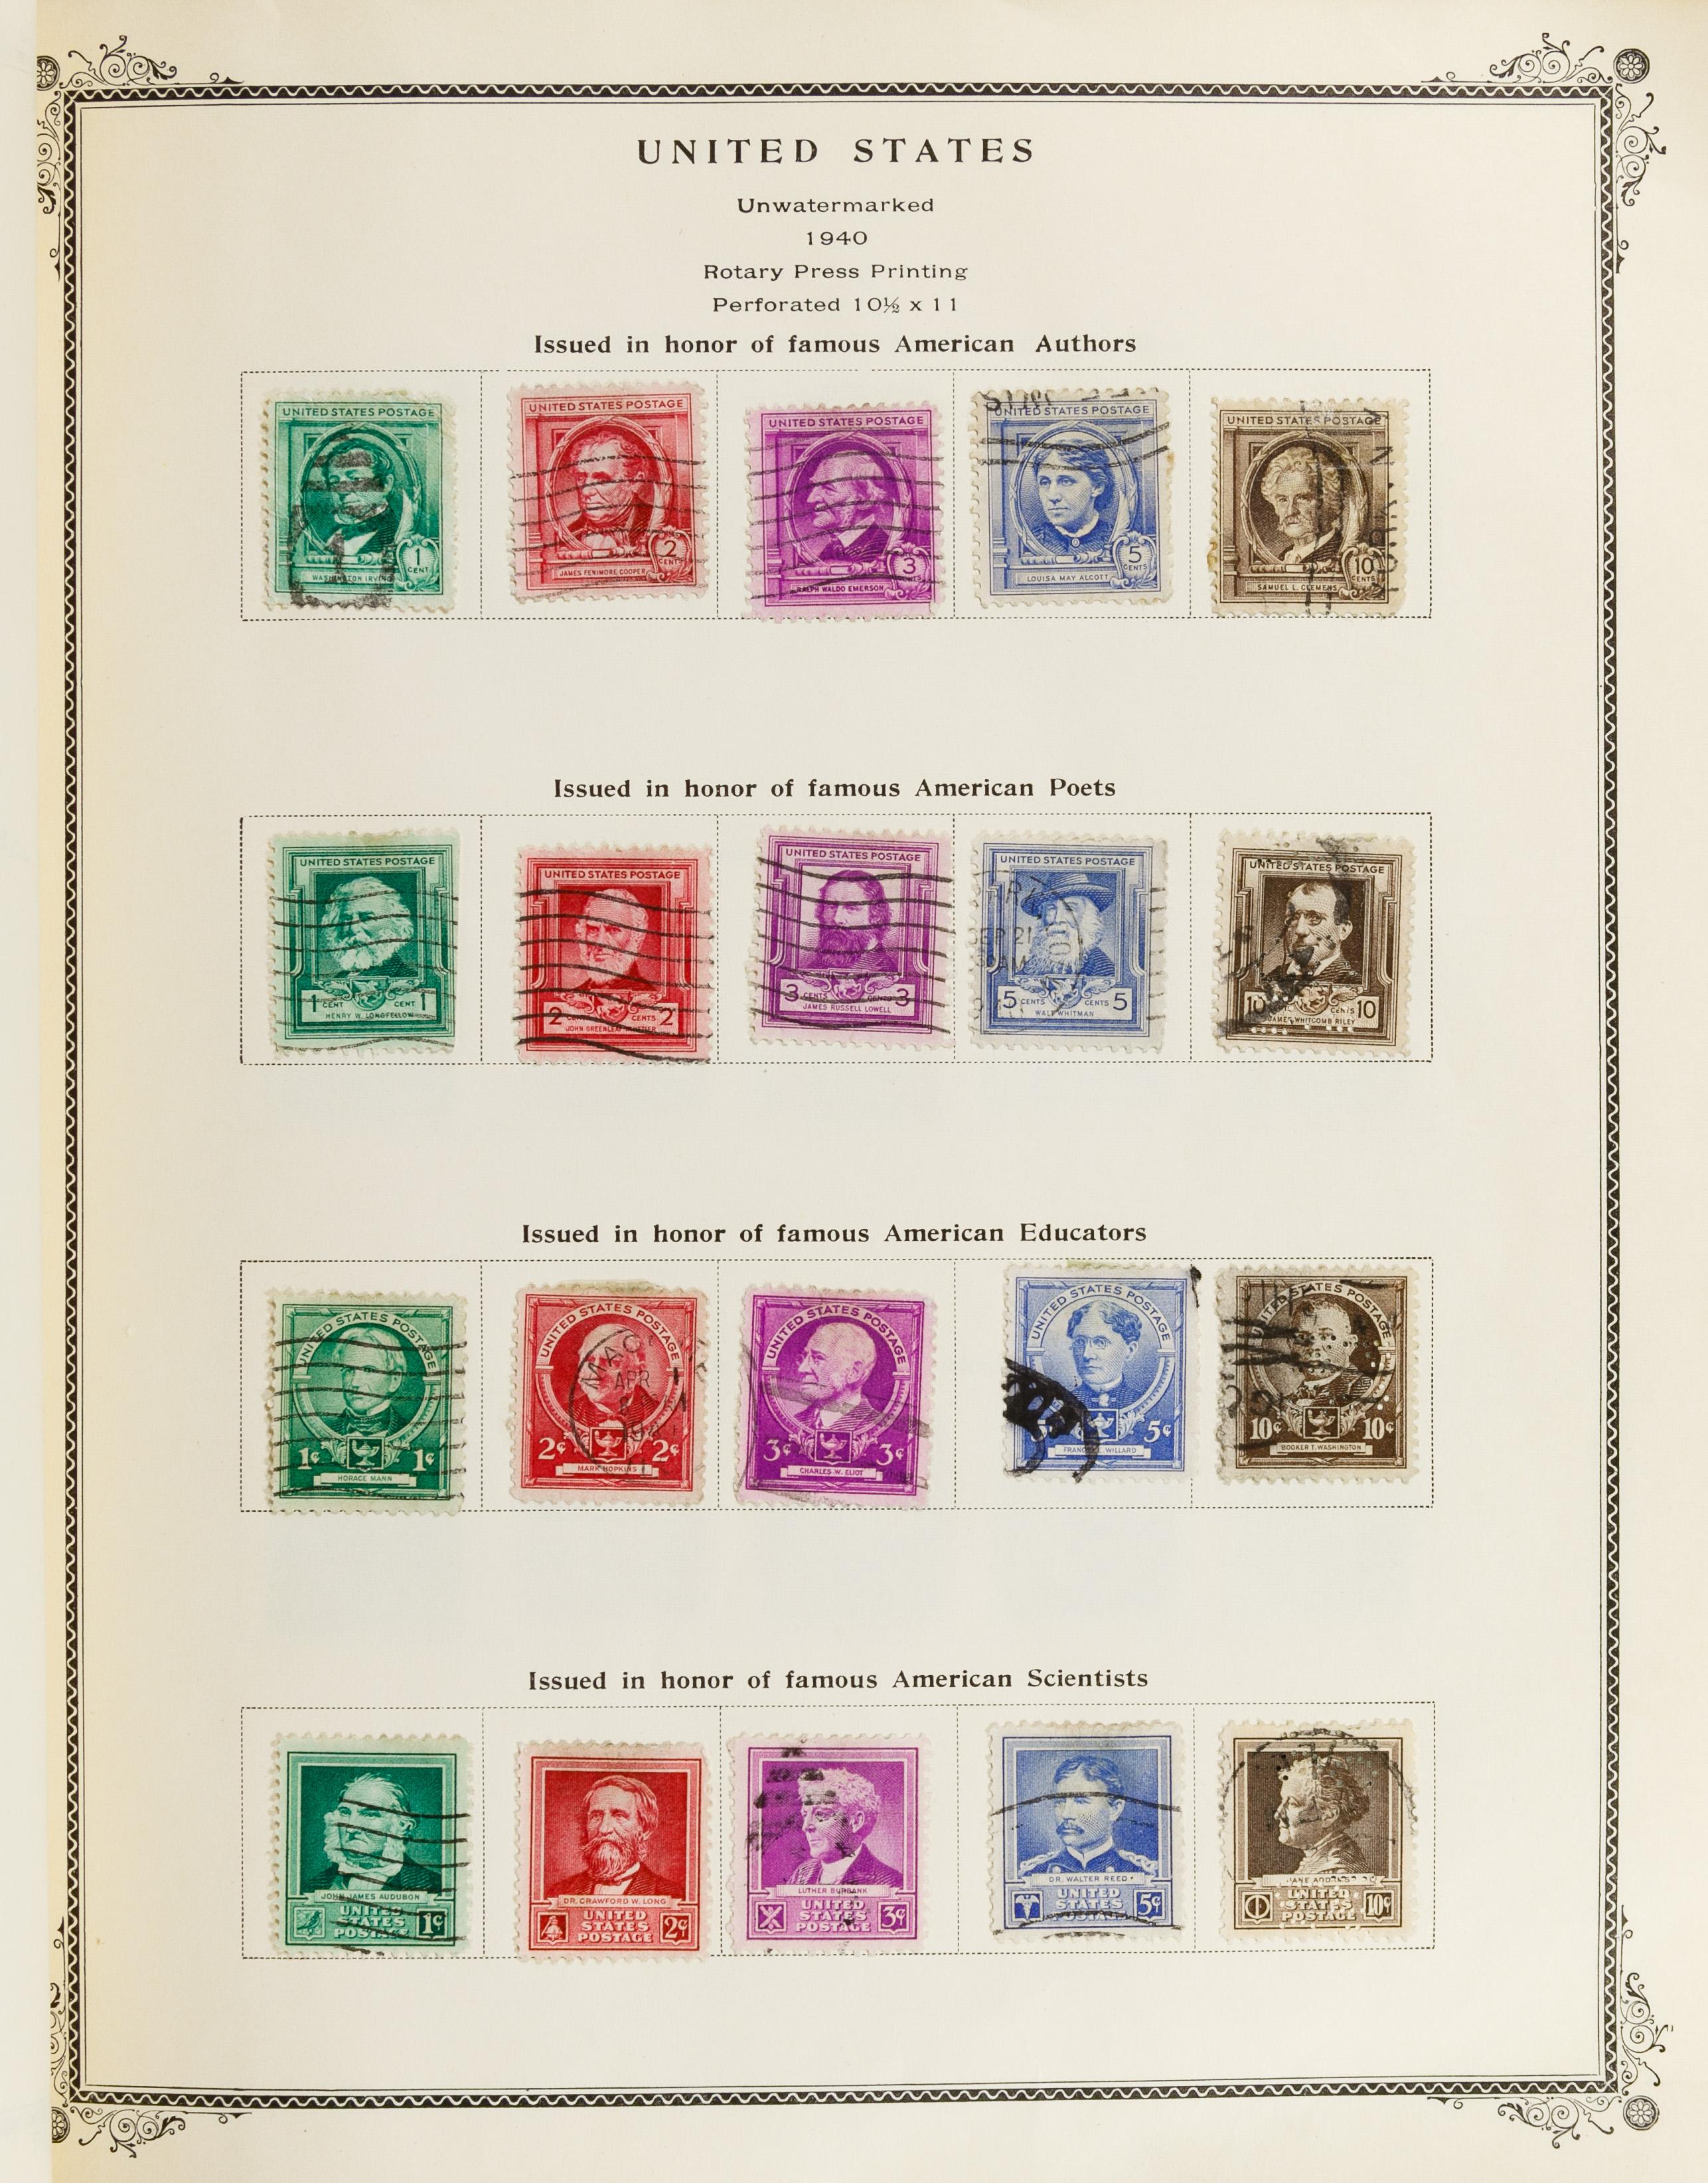 US and World Postage Stamp Assortment